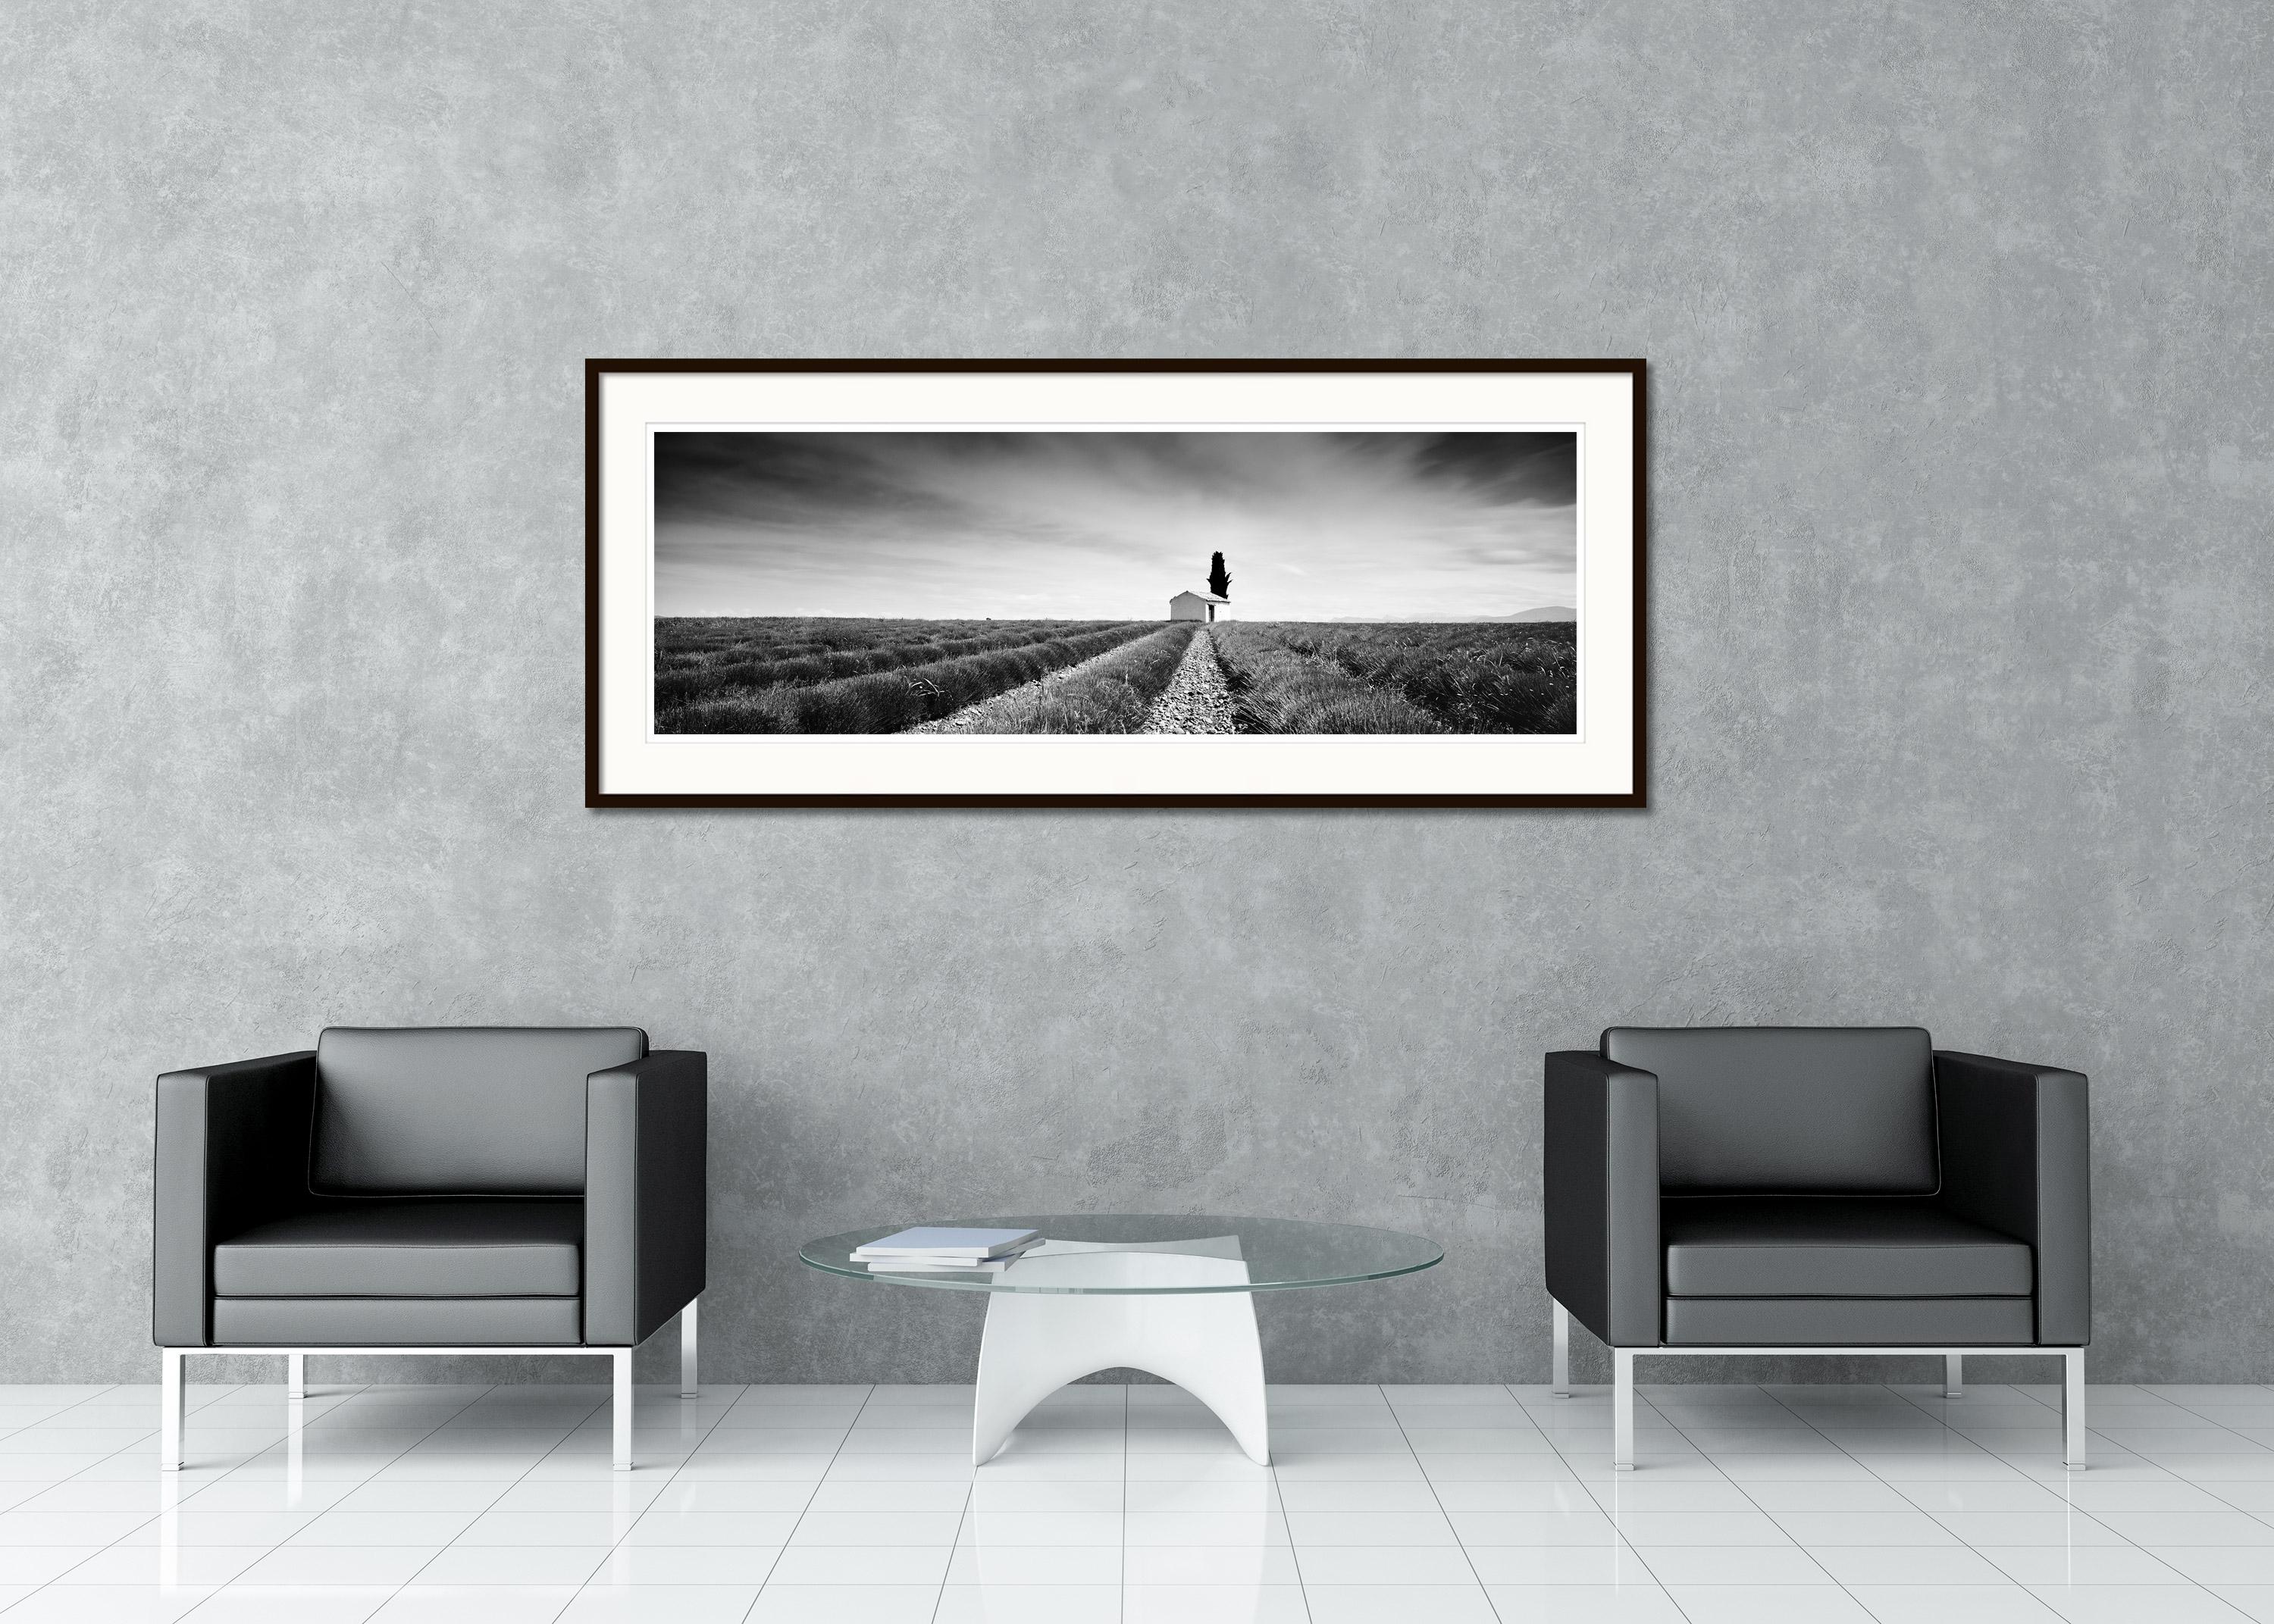 Black and White Fine Art Panorama Photography - Small hut with tree in lavender field, France. Archival pigment ink print, edition of 7. Signed, titled, dated and numbered by artist. Certificate of authenticity included. Printed with 4cm white